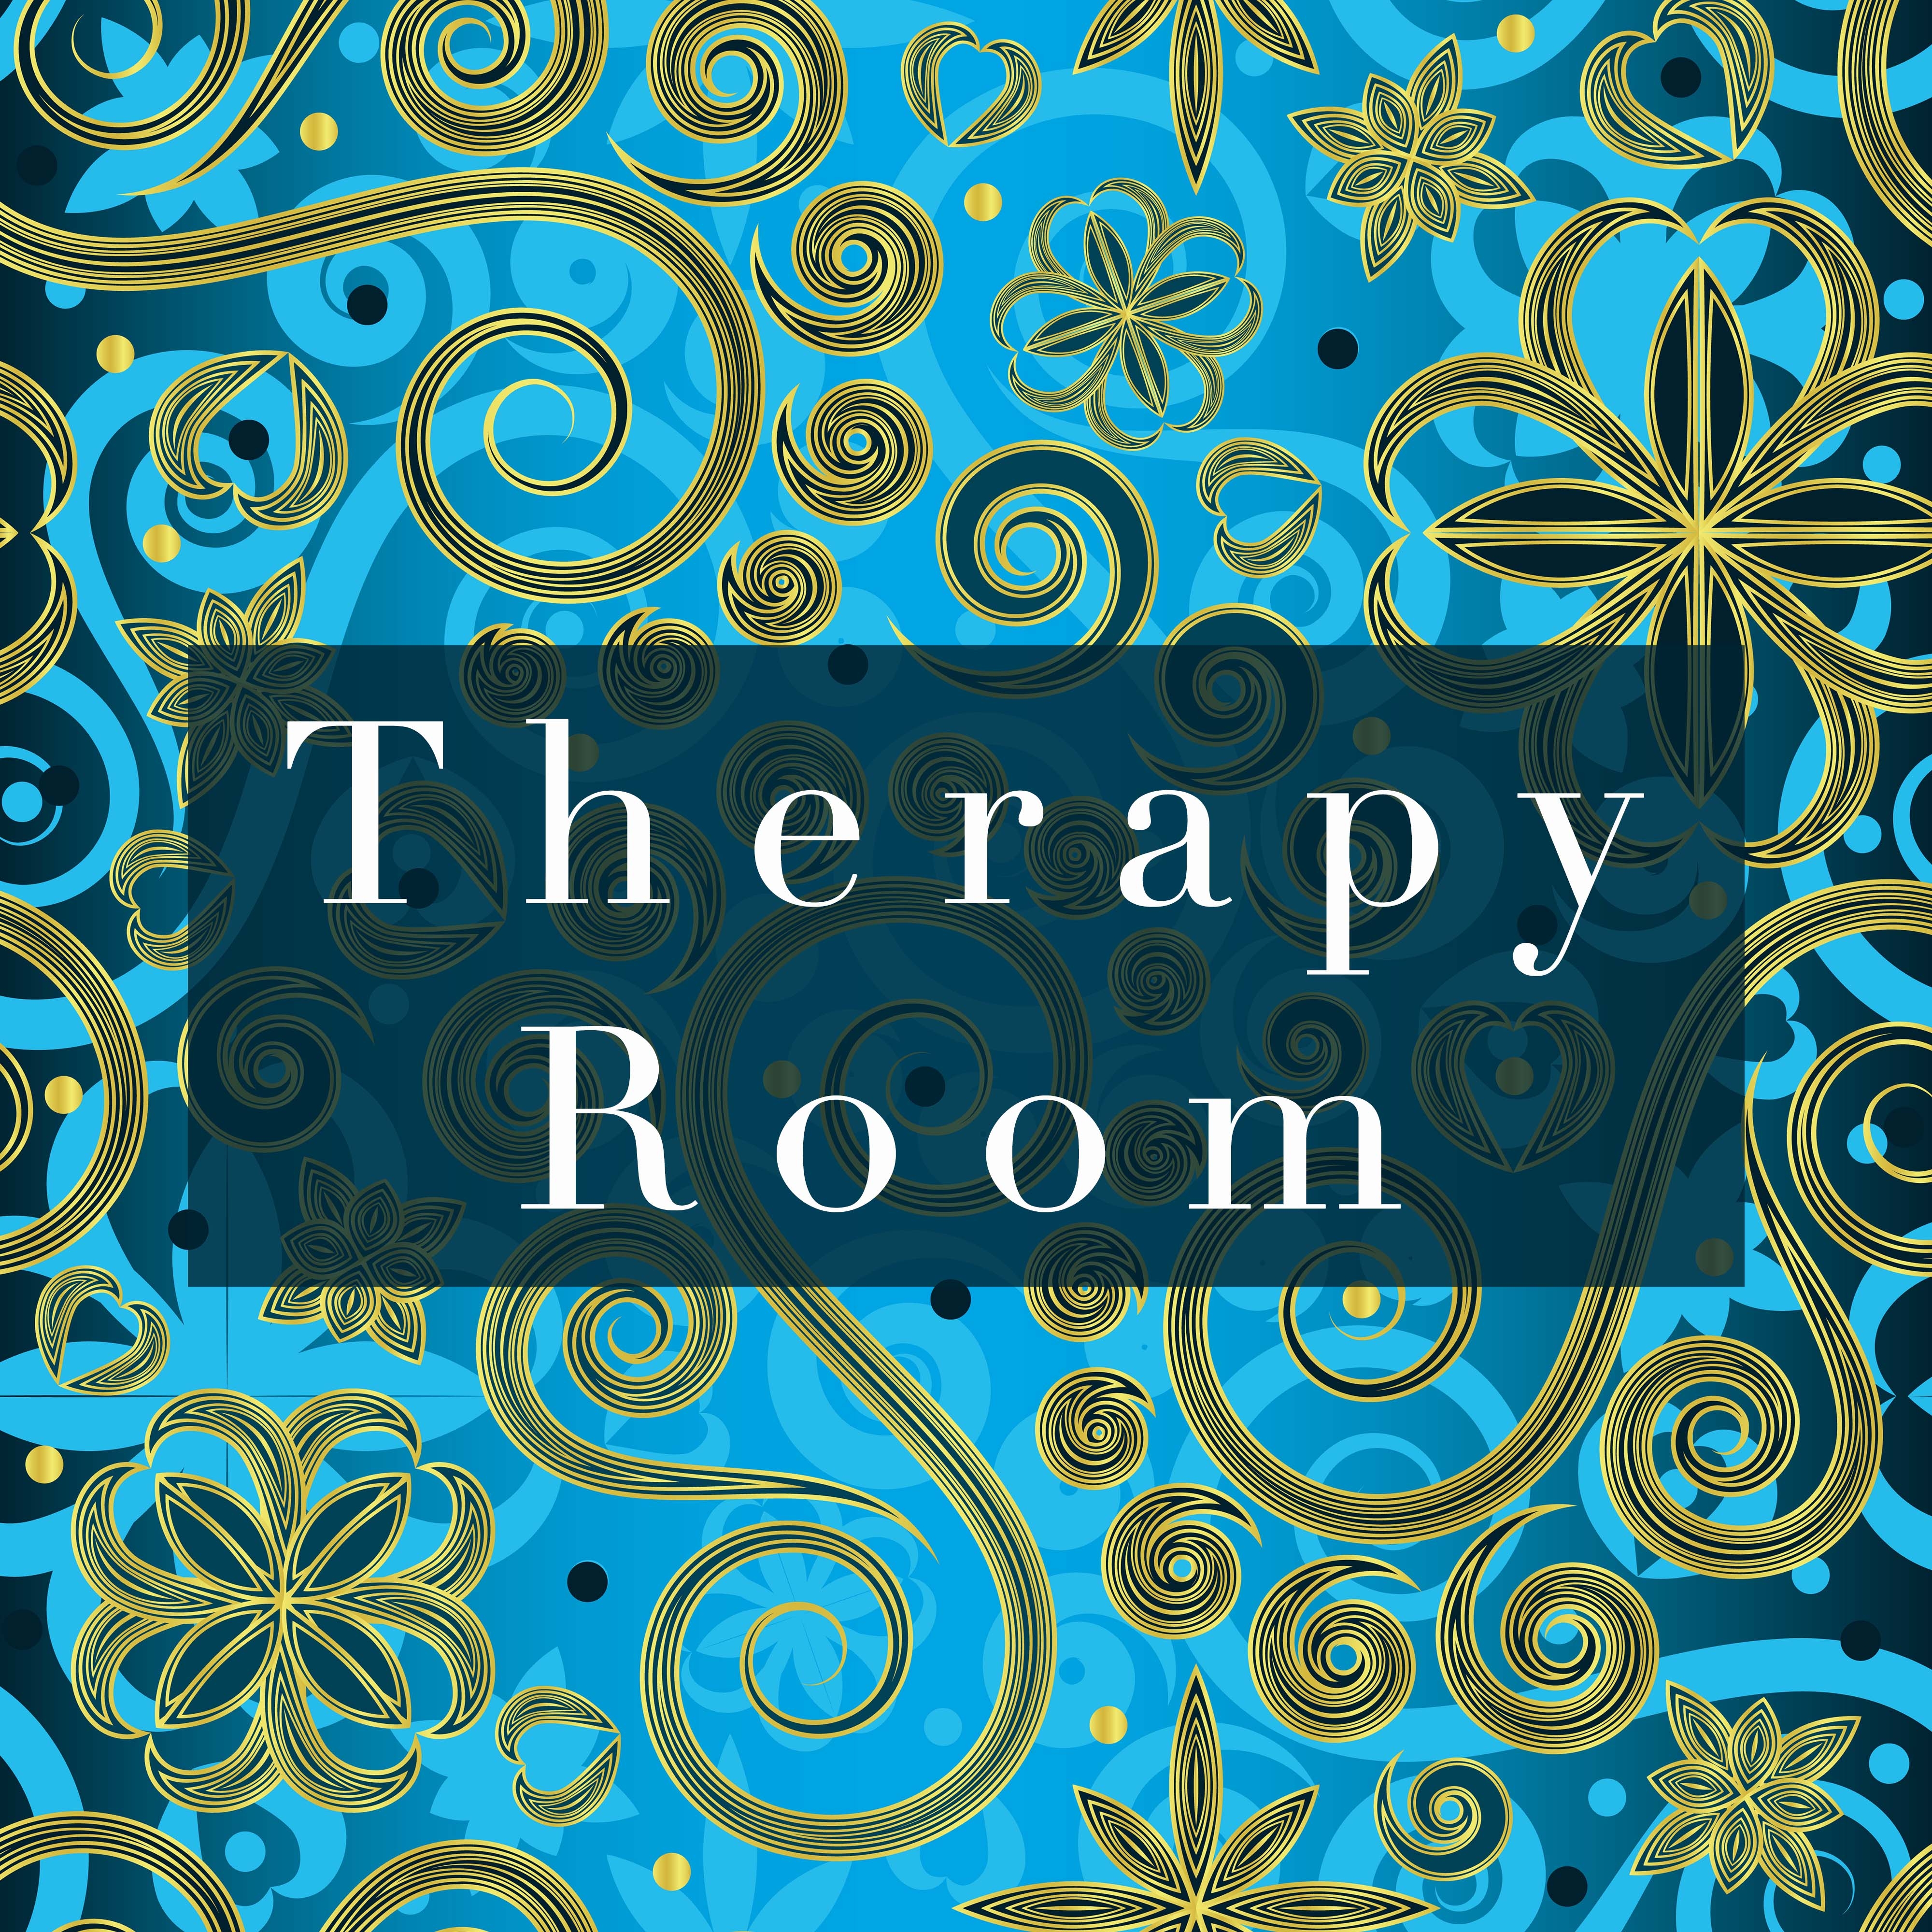 Therapy Room - Soothing Music to help you Sleep and Find Comfort